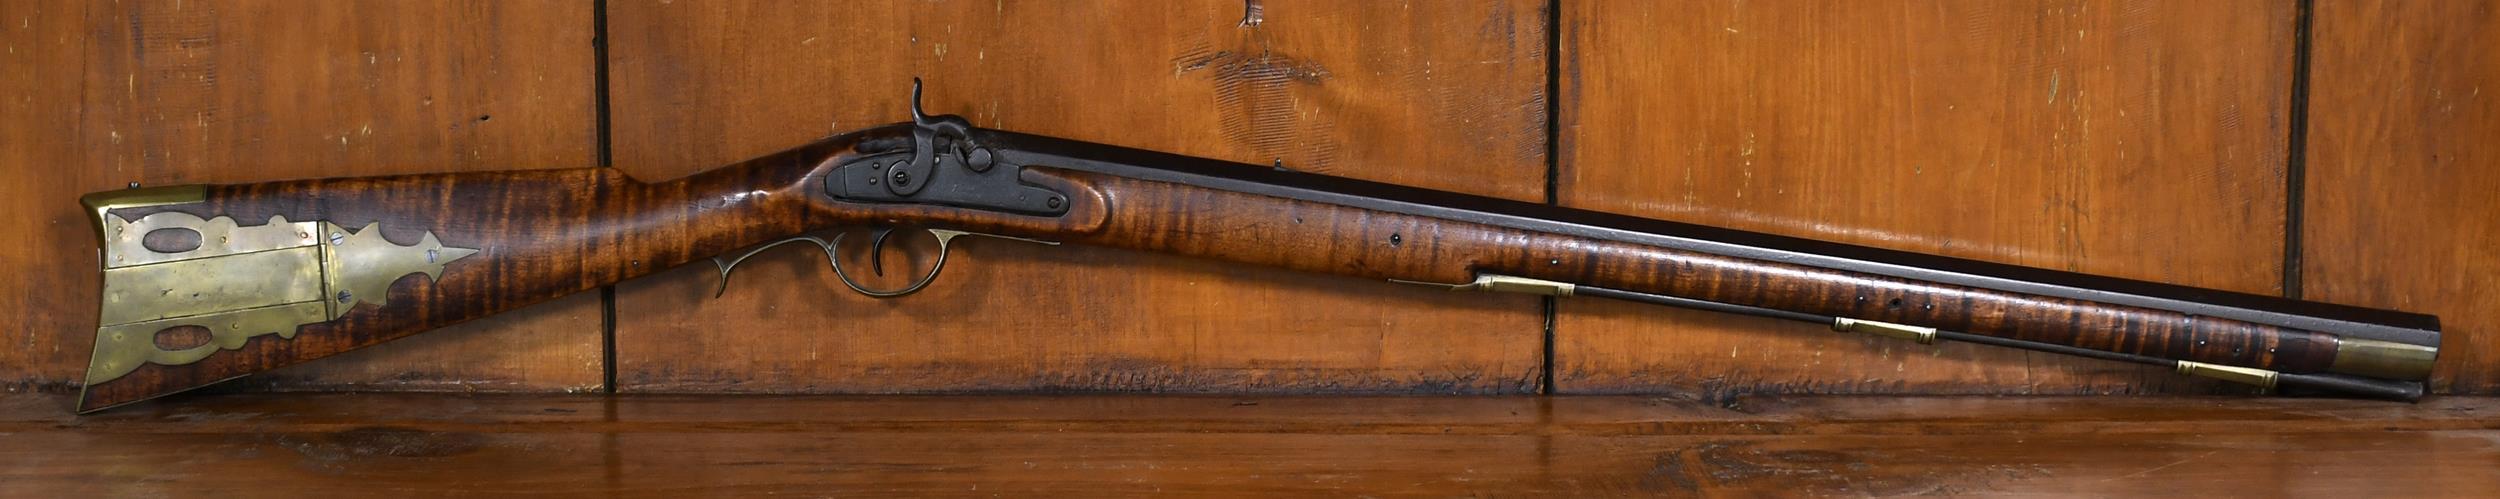 EARLY 19TH C KENTUCKY RIFLE A 307467